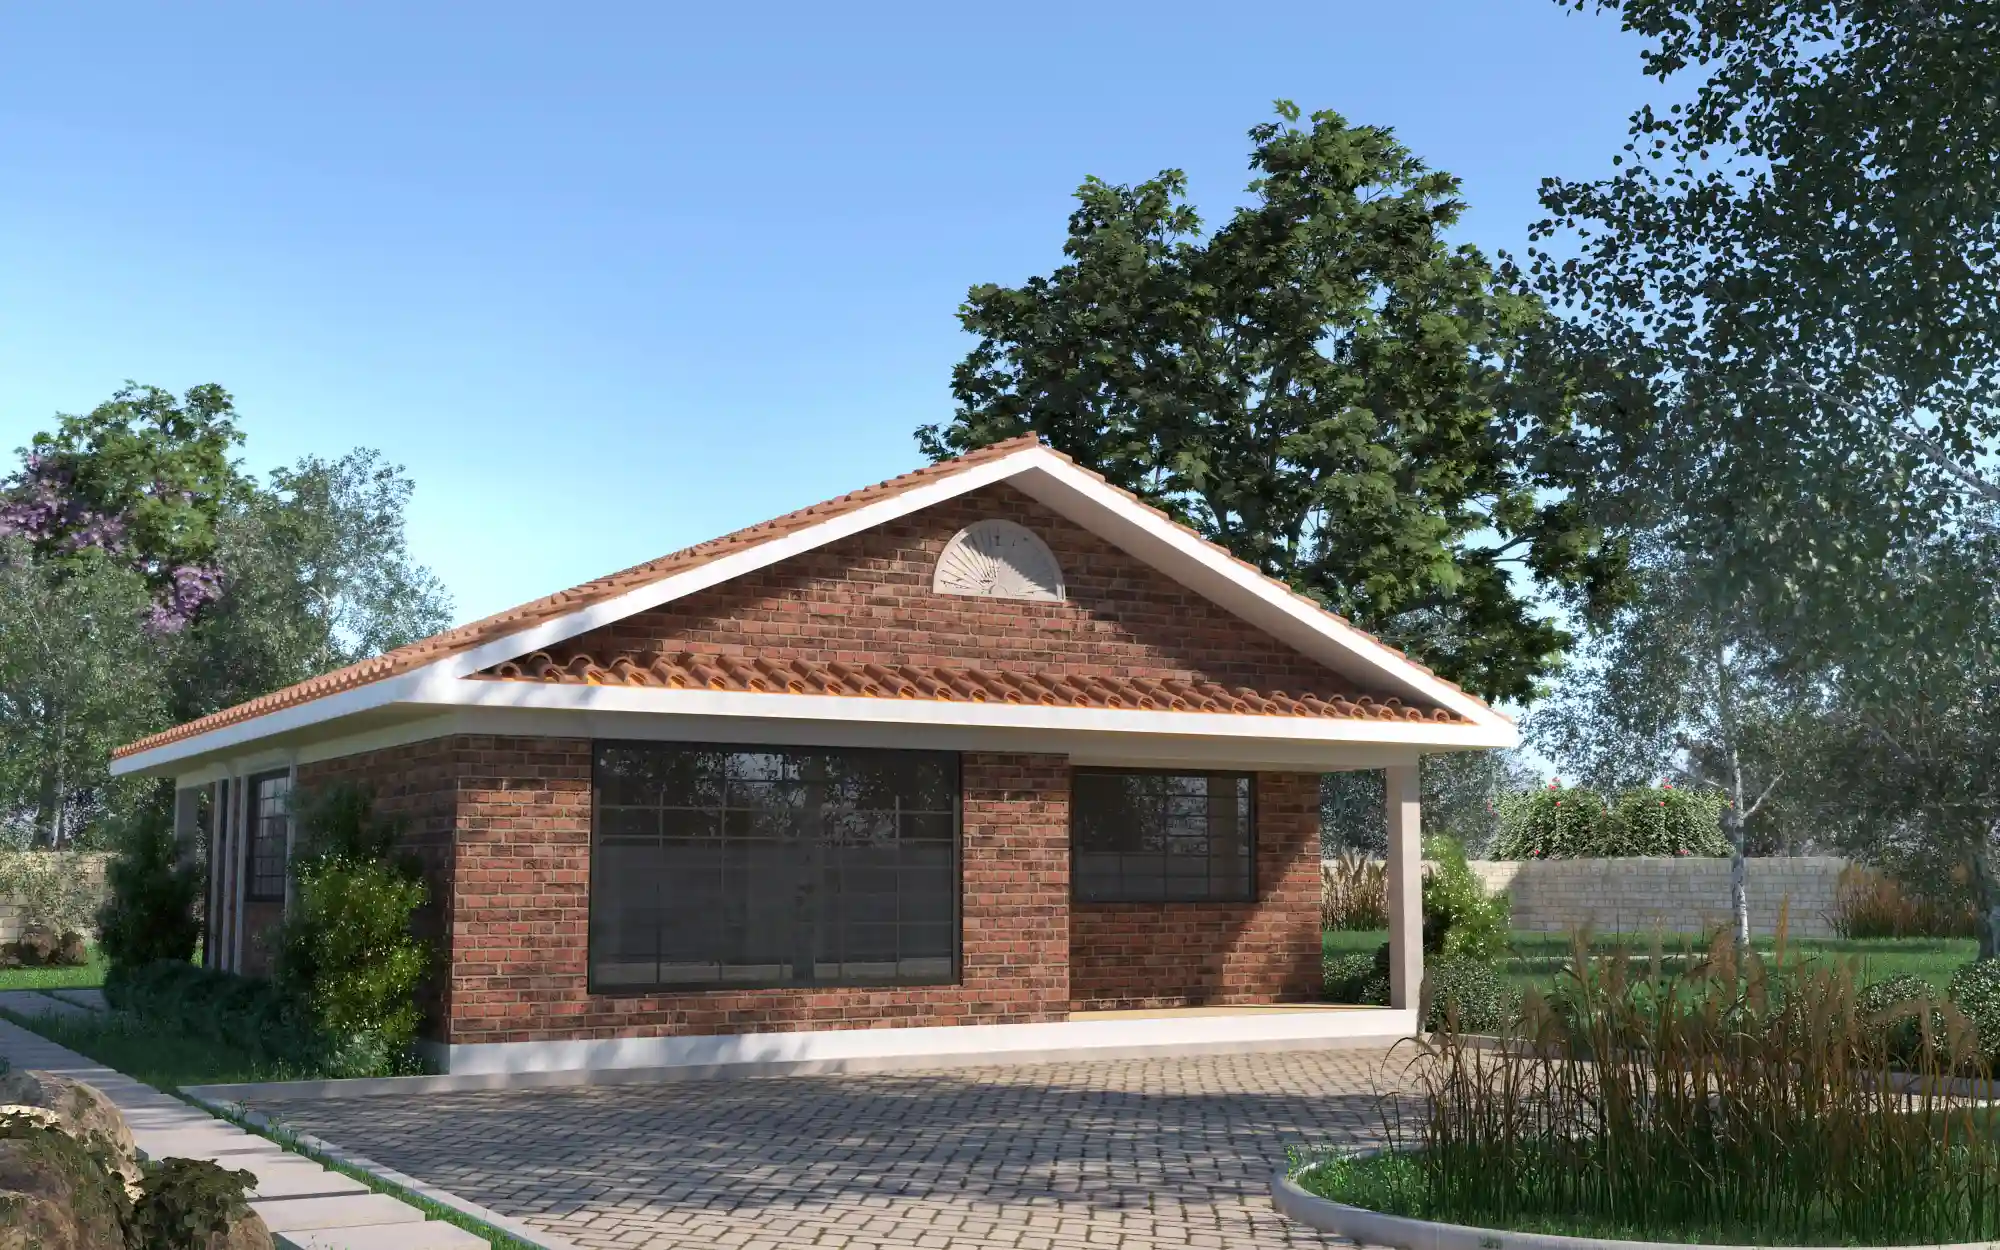 2 Bedroom Bungalow -ID 2111 - 2 BED BNGL TP1 OP1 FRONT.jpg from Inuua Tujenge house plans with 2 bedrooms and 1 bathrooms. ( bungalow )